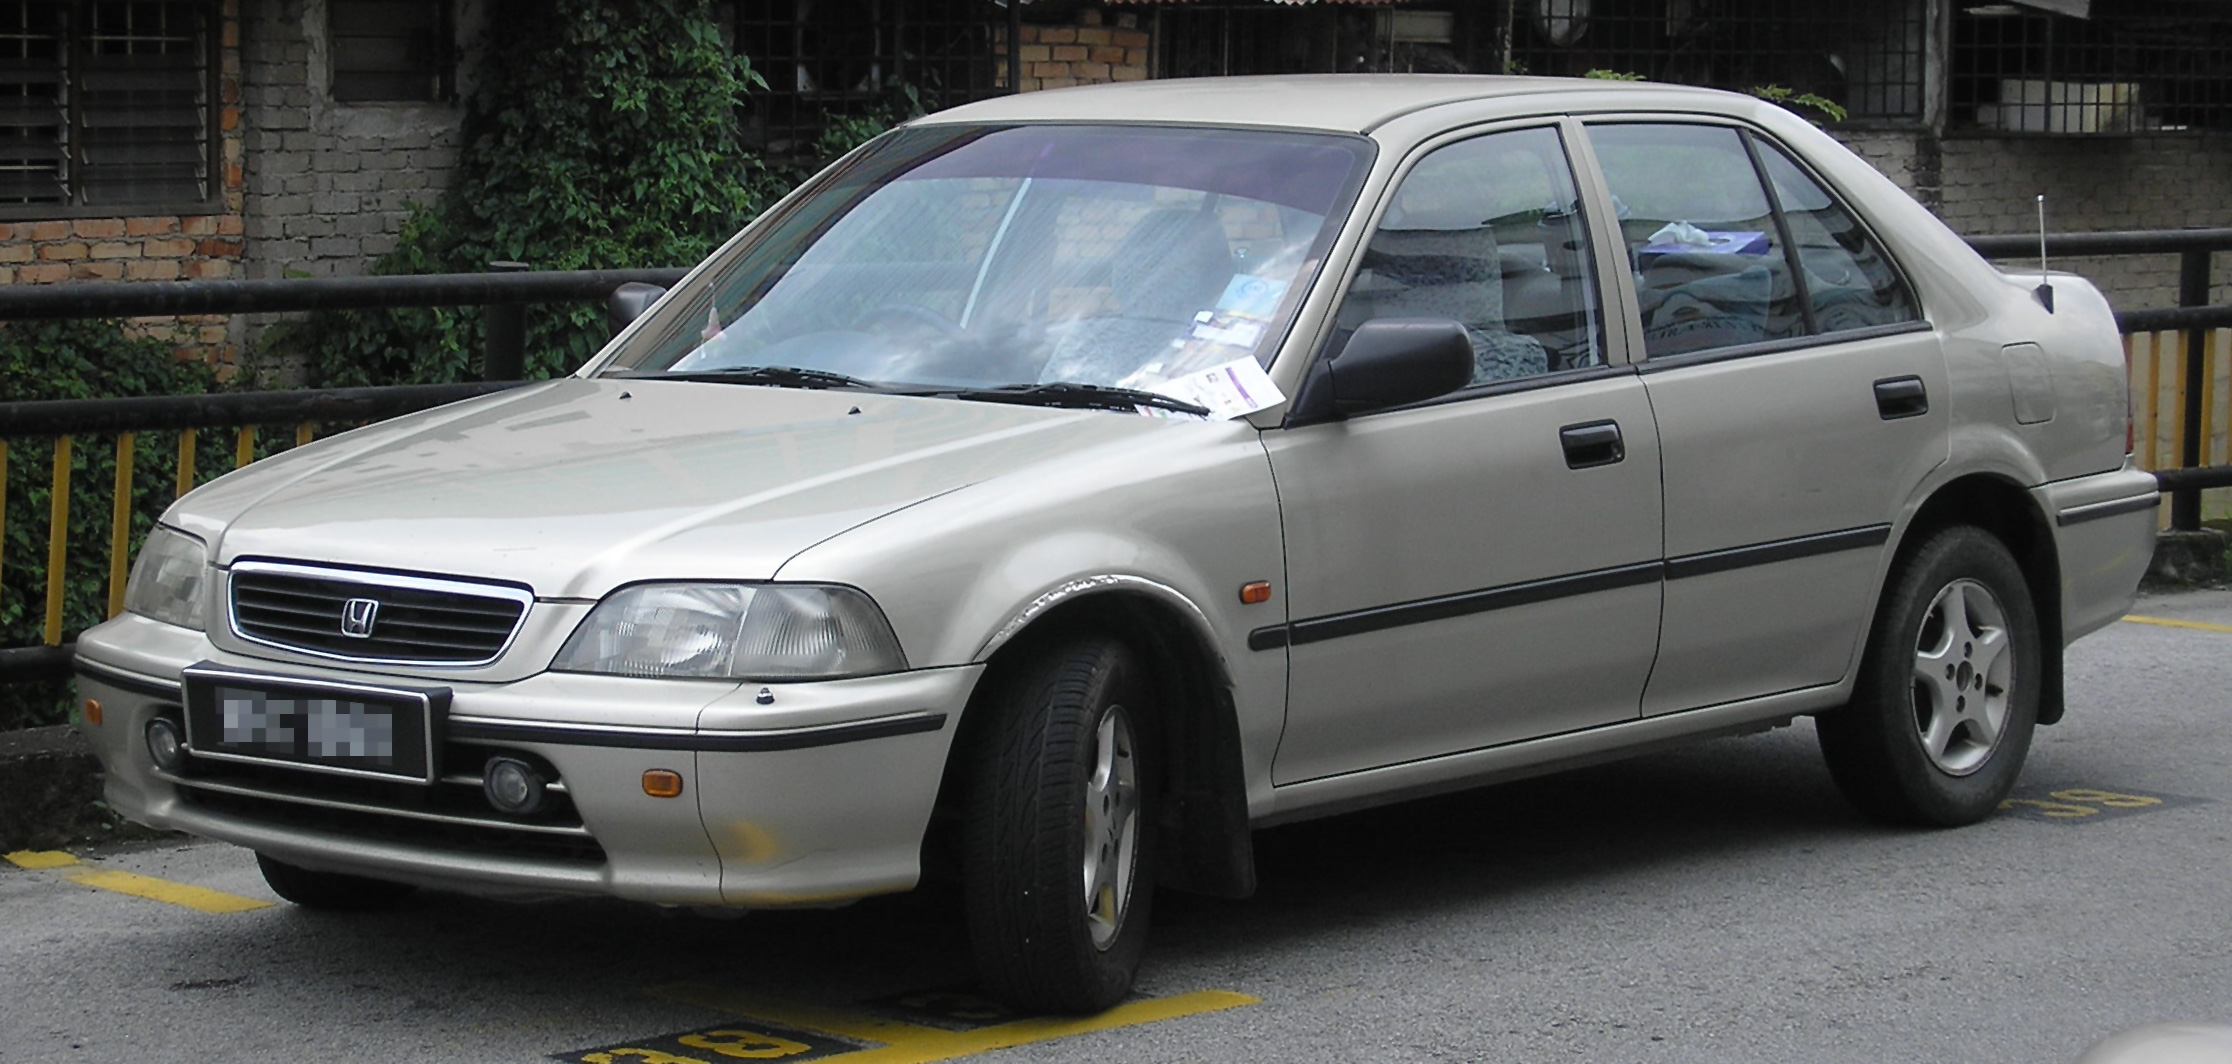 Honda City 3rd Generation Exterior Front Side View